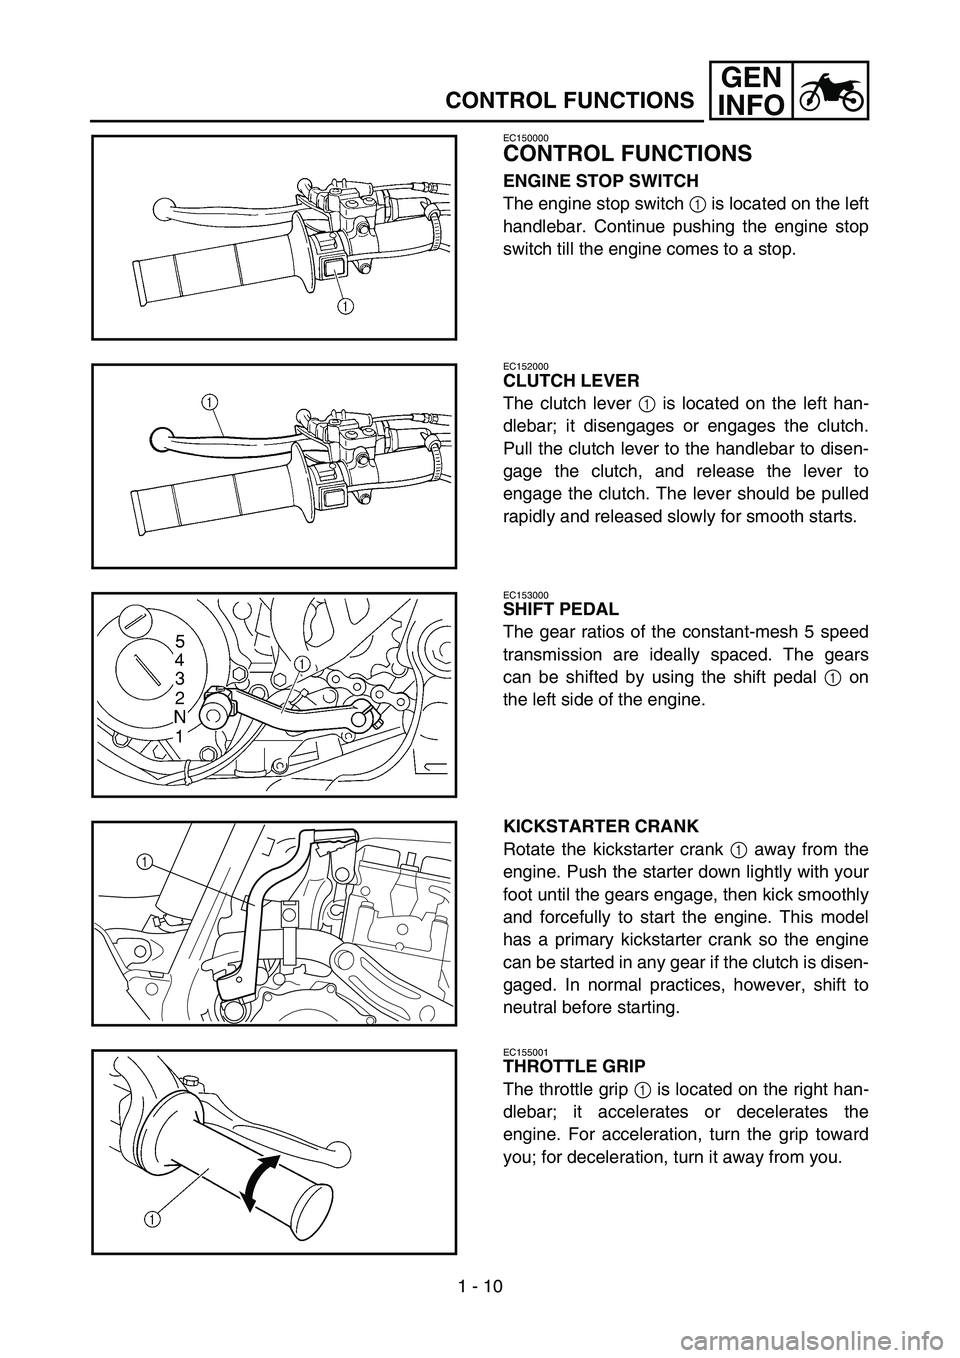 YAMAHA YZ250F 2007 Service Manual 1 - 10
GEN
INFO
CONTROL FUNCTIONS
EC150000
CONTROL FUNCTIONS
ENGINE STOP SWITCH
The engine stop switch 1 is located on the left
handlebar. Continue pushing the engine stop
switch till the engine comes